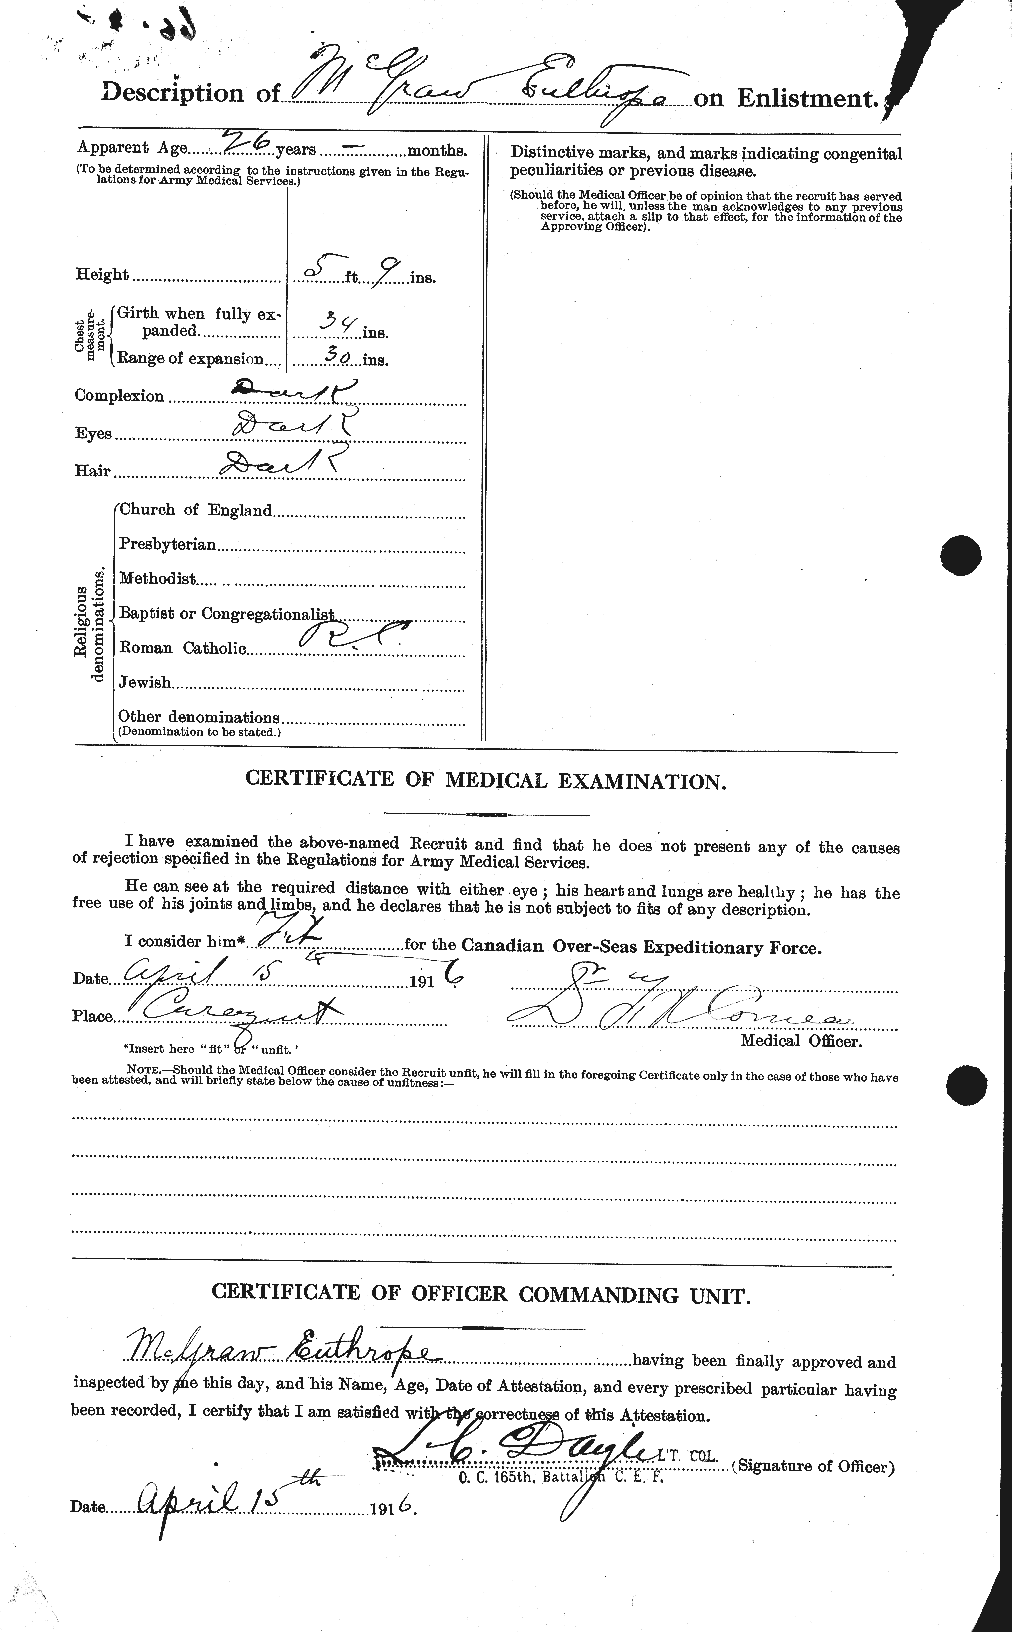 Personnel Records of the First World War - CEF 523724b